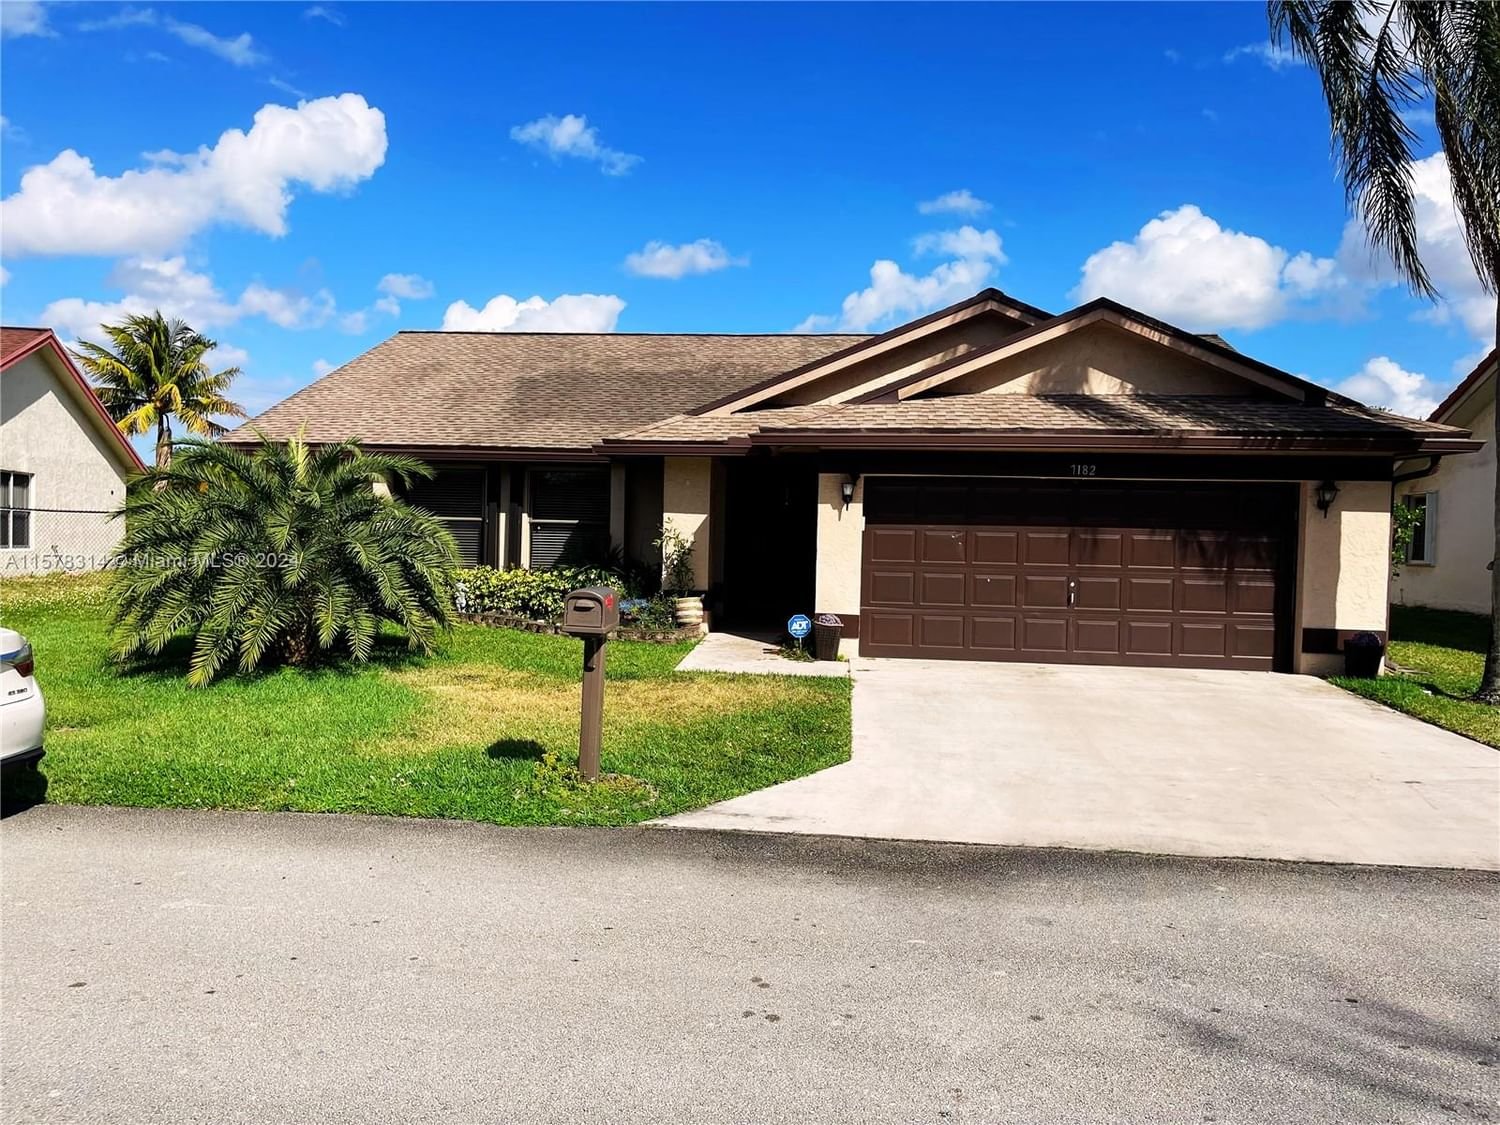 Real estate property located at 7182 80th Way, Broward County, Woodmont Timber Pointe, Tamarac, FL